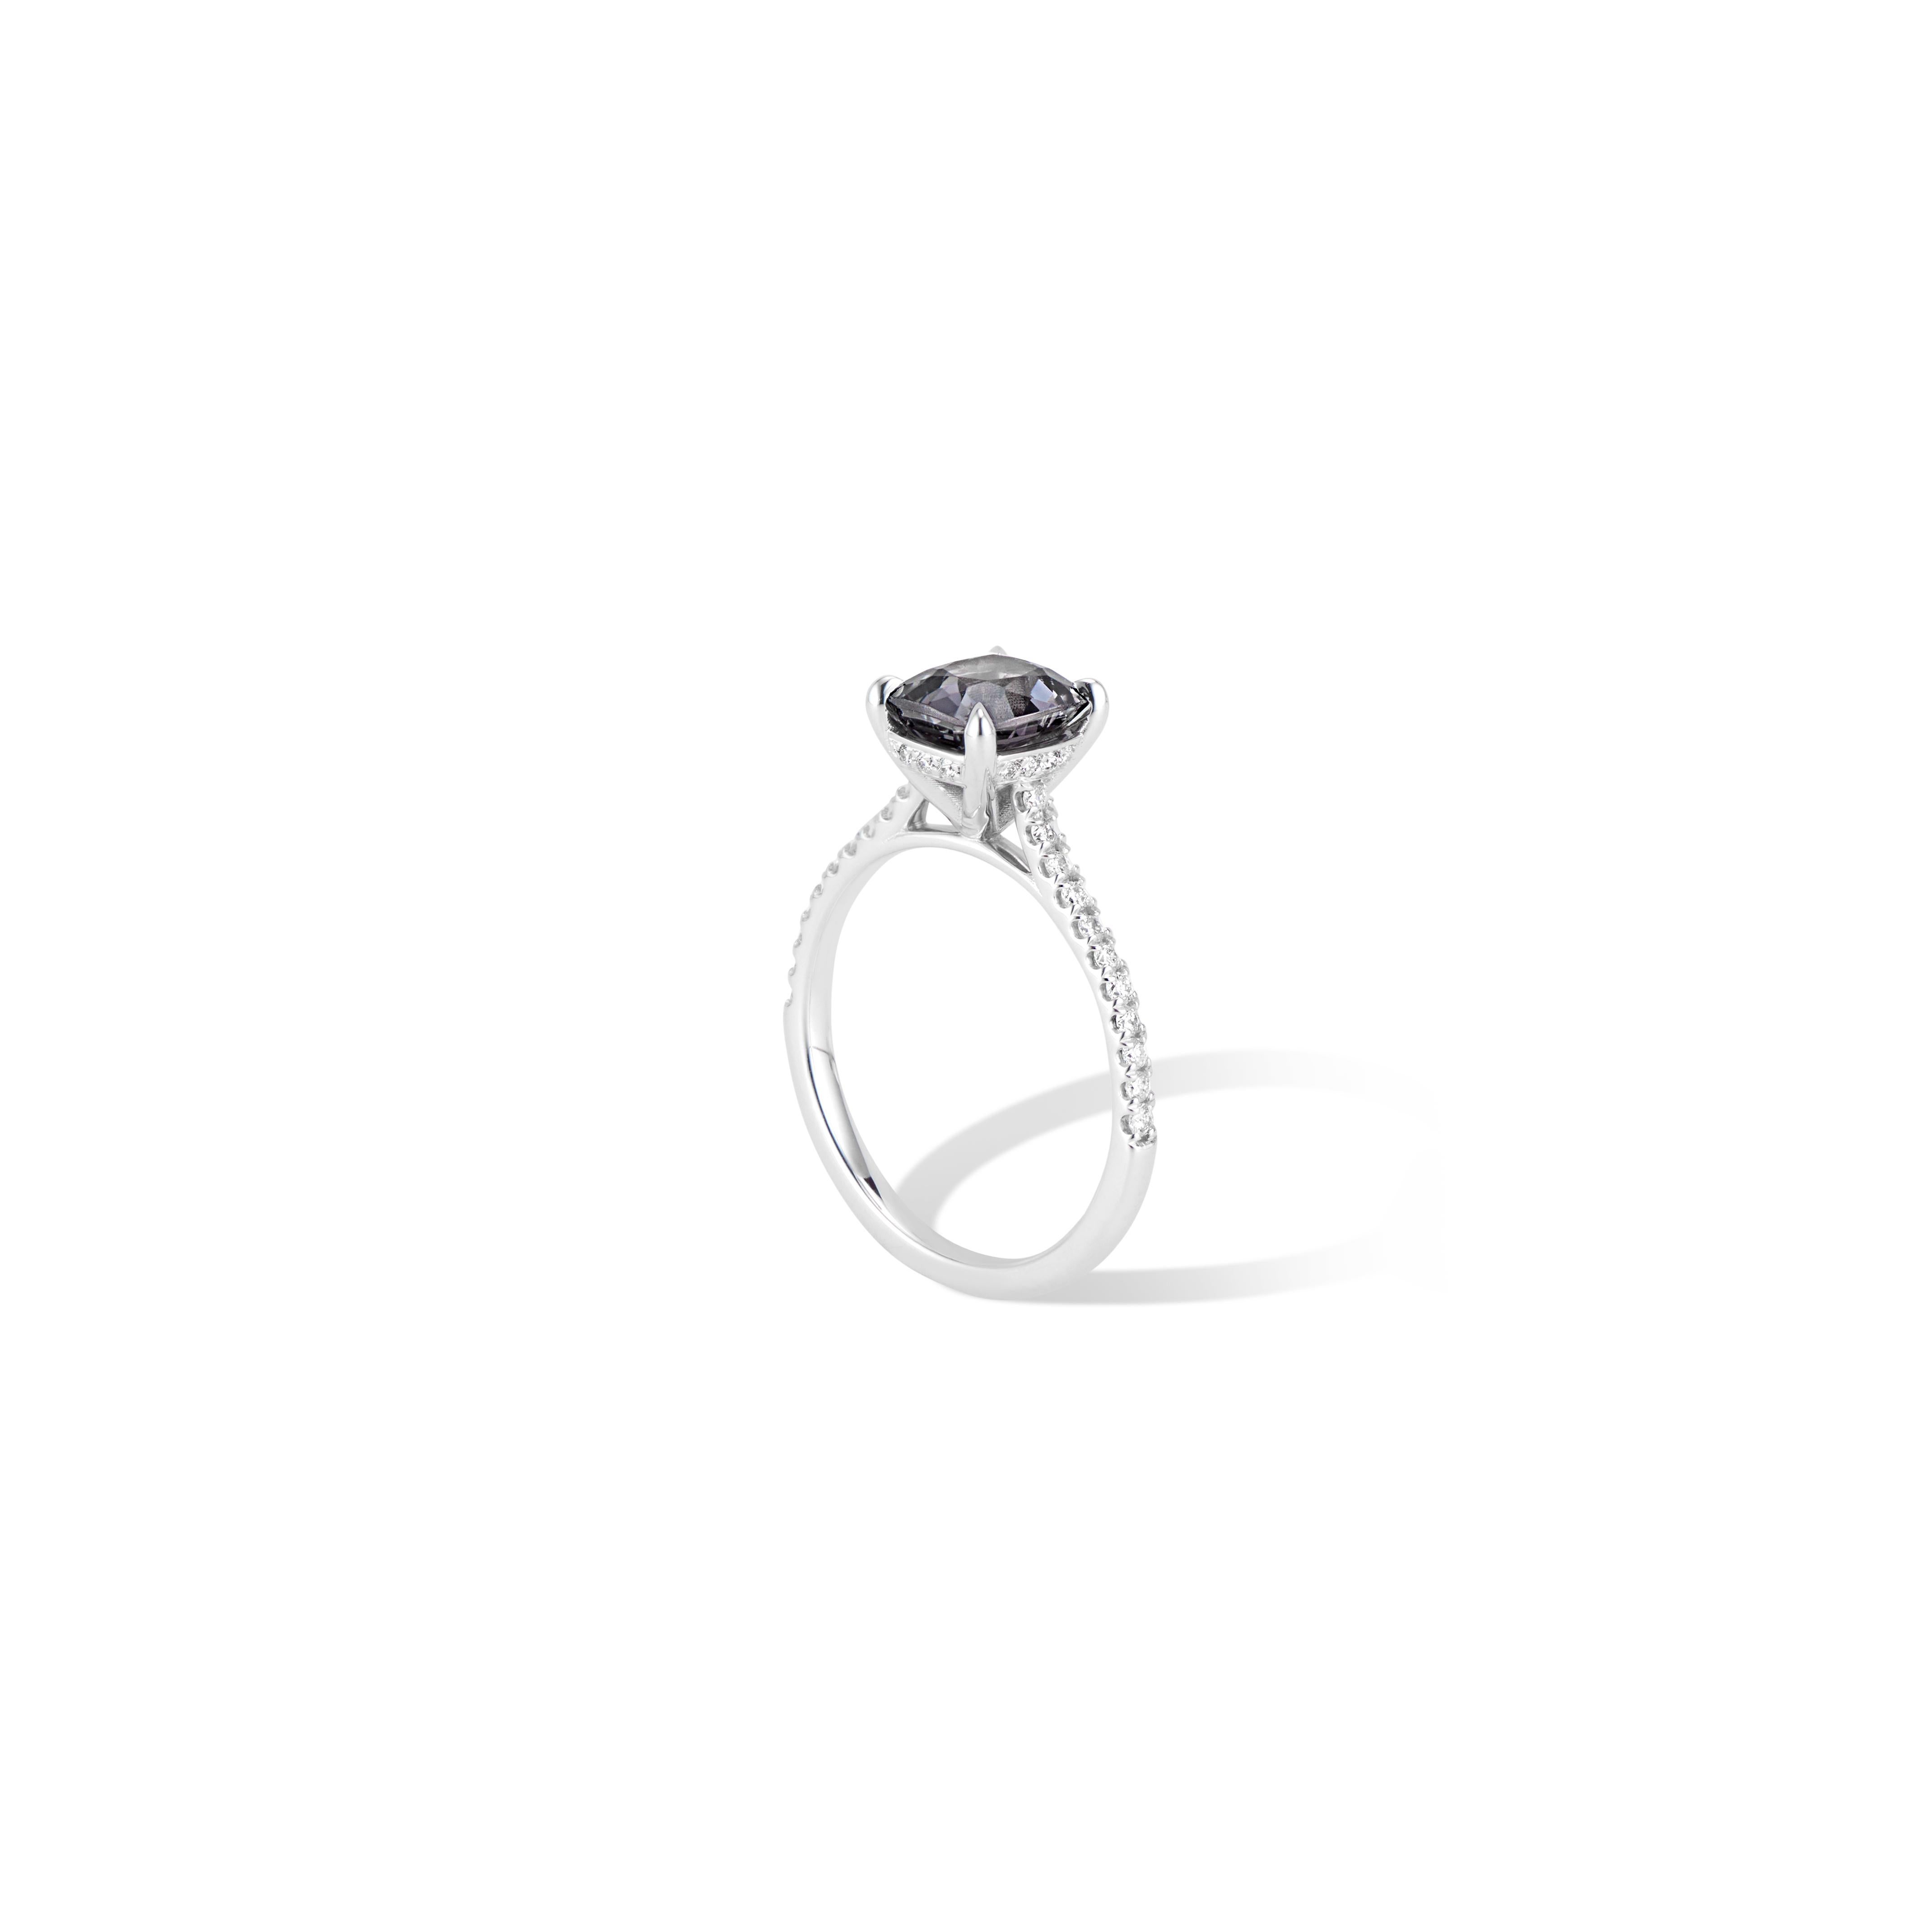 A beautiful 1.51 cwt. natural grey spinel set in an elegant claw setting with a hidden diamond halo, on a band accented with VS quality round brilliant diamonds.
It’s all in the details with this unique Spinel ring.

Spinel is generally highly